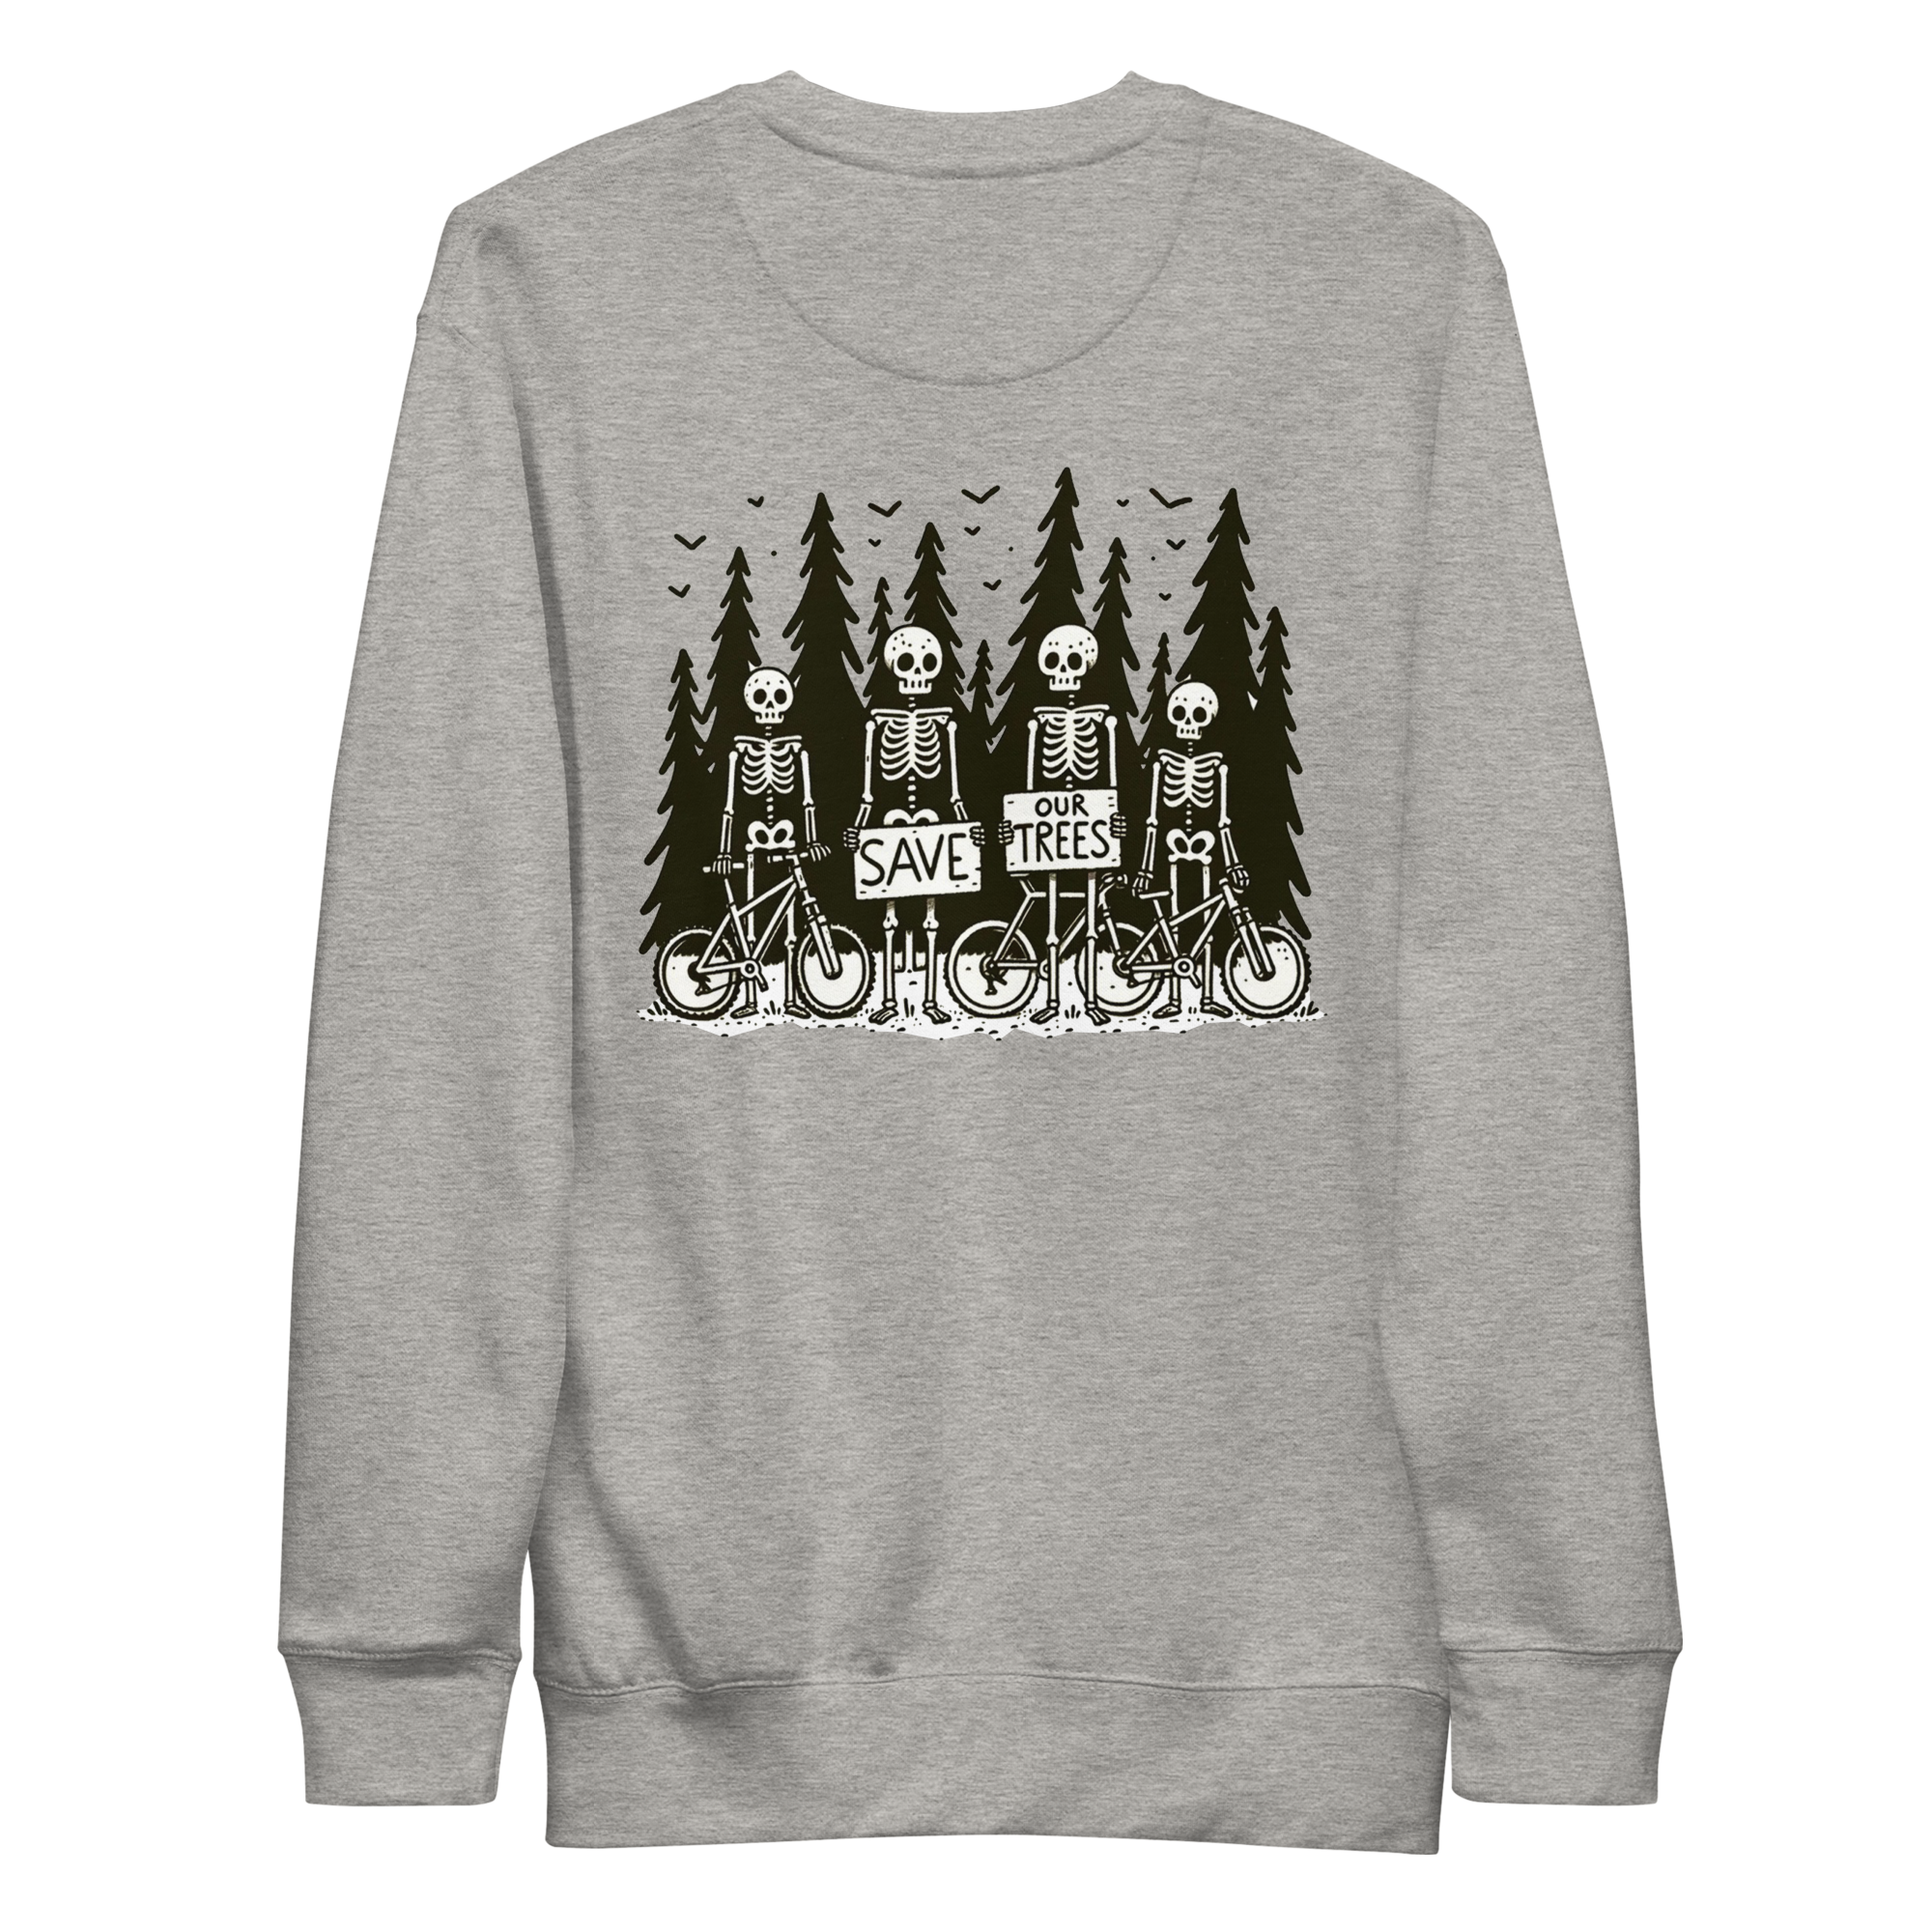 Save our Trees Sweater